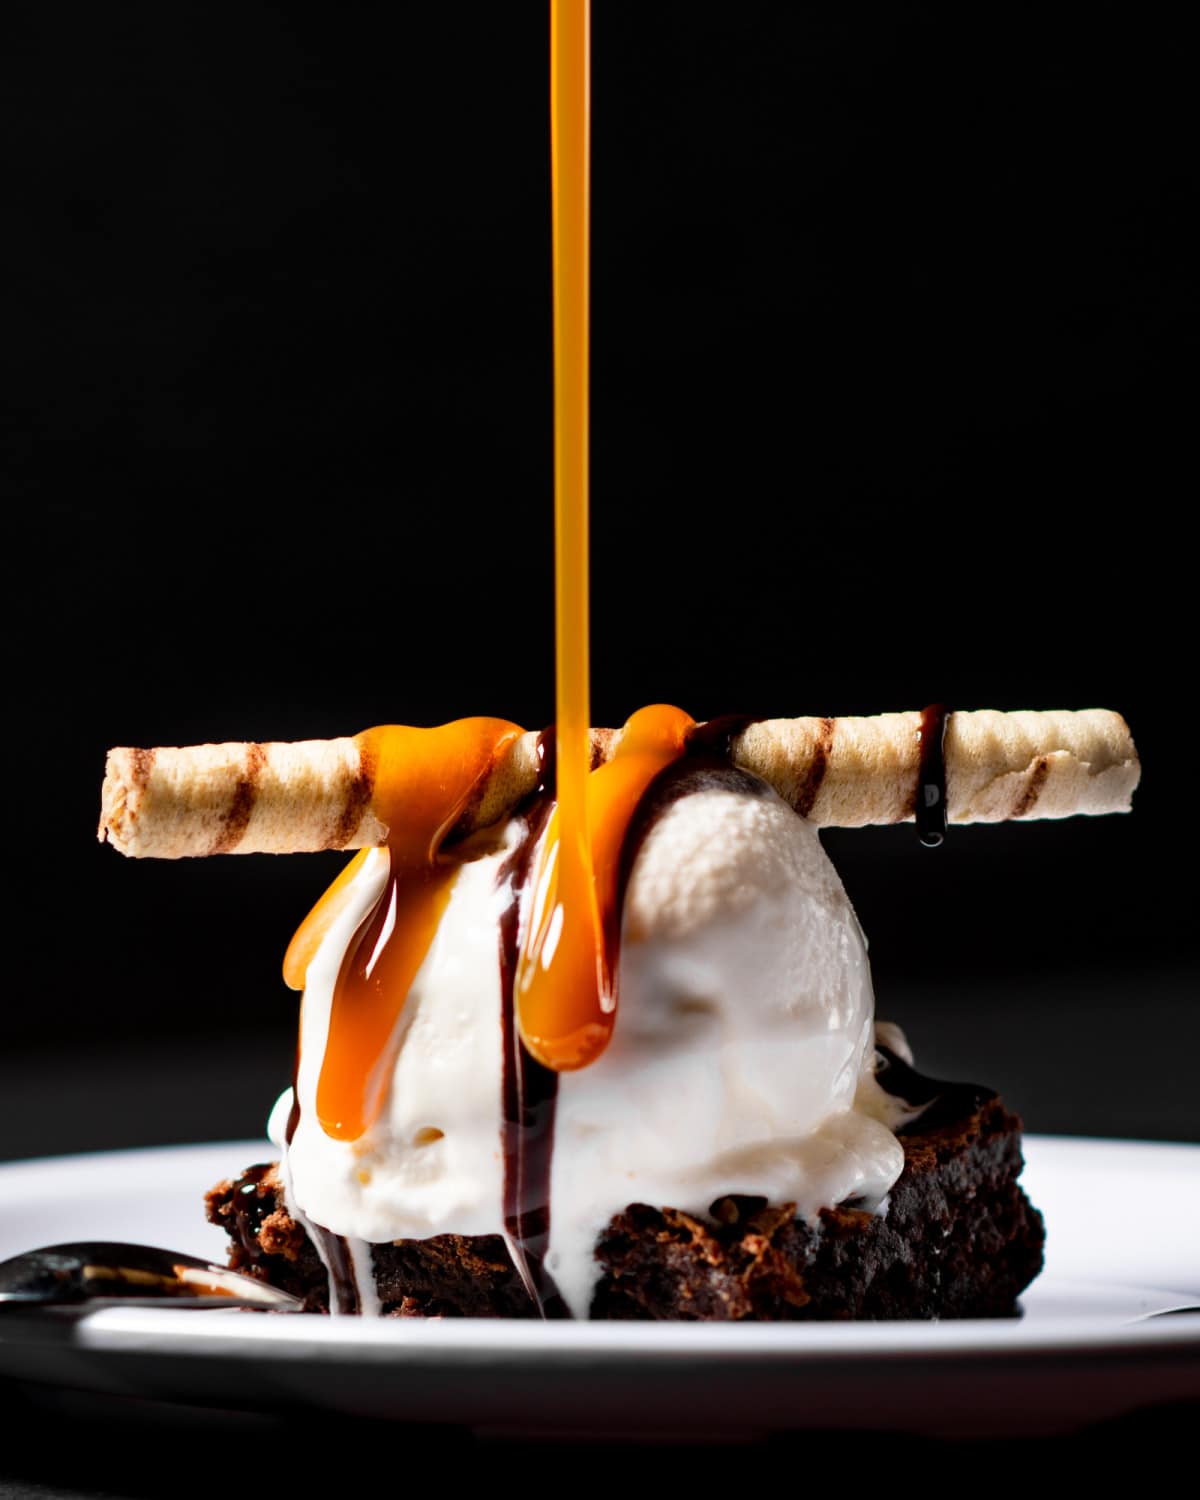 Caramel sauce being drizzled on a brownie sundae.